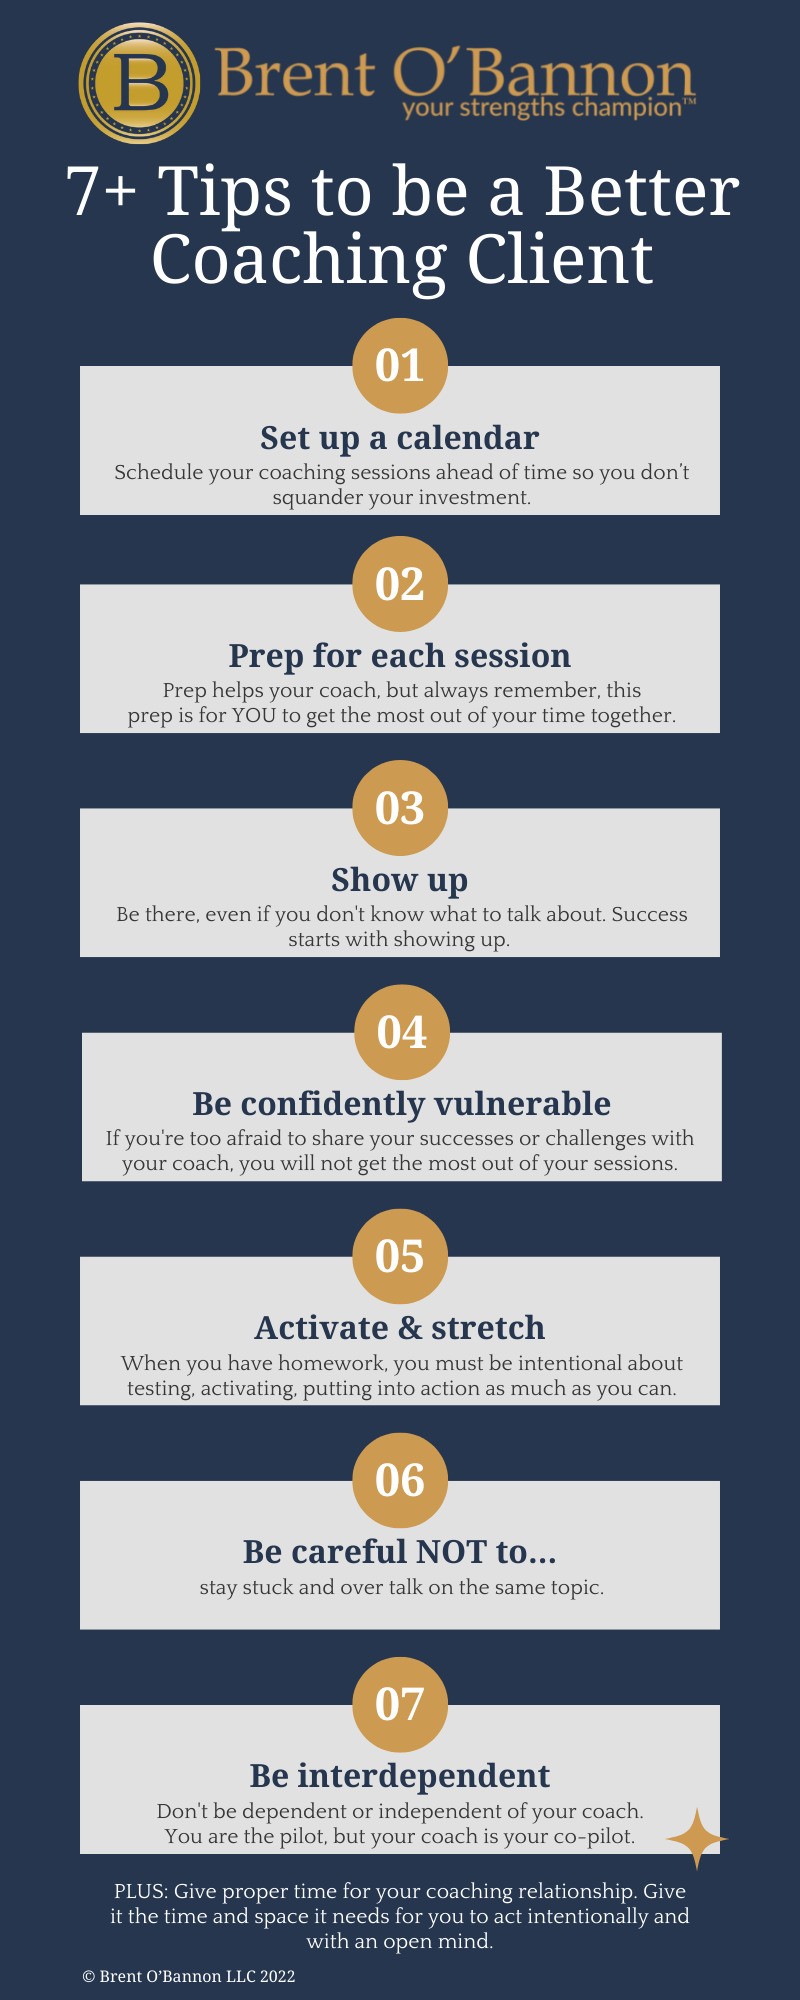 Infographic of 7tips to be a better coaching client: 1-set up a calendar, 2-prep for each session, 3-show up, 4-be confidently vulnerable, 5-activate and stretch, 6-be careful NOT to, 7-be interdependent, PLUS-give proper time for your coaching relationship.